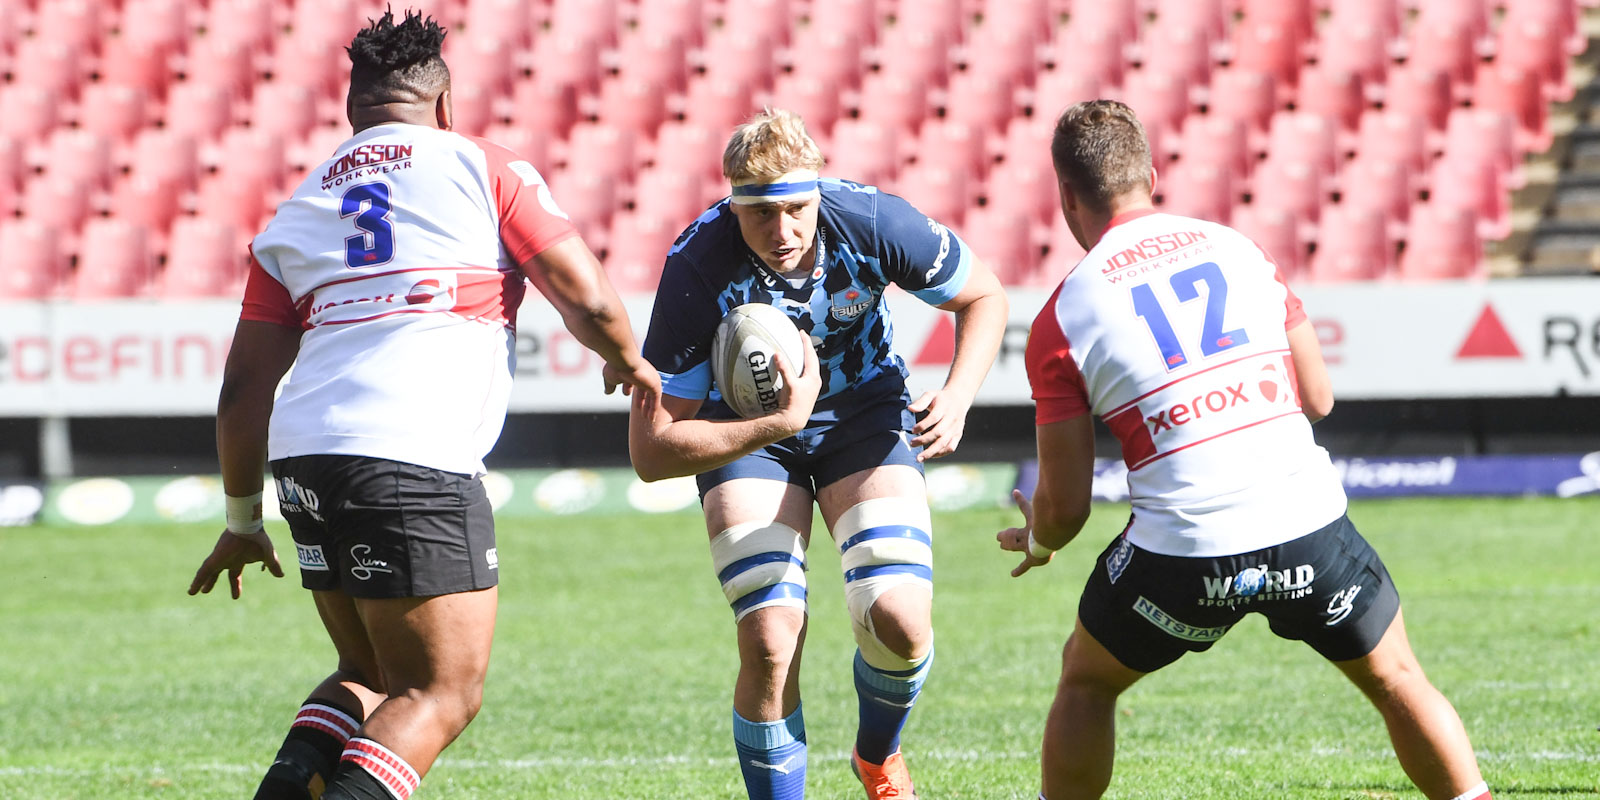 Janko Swanepoel on the charge for the Vodacom Blue Bulls